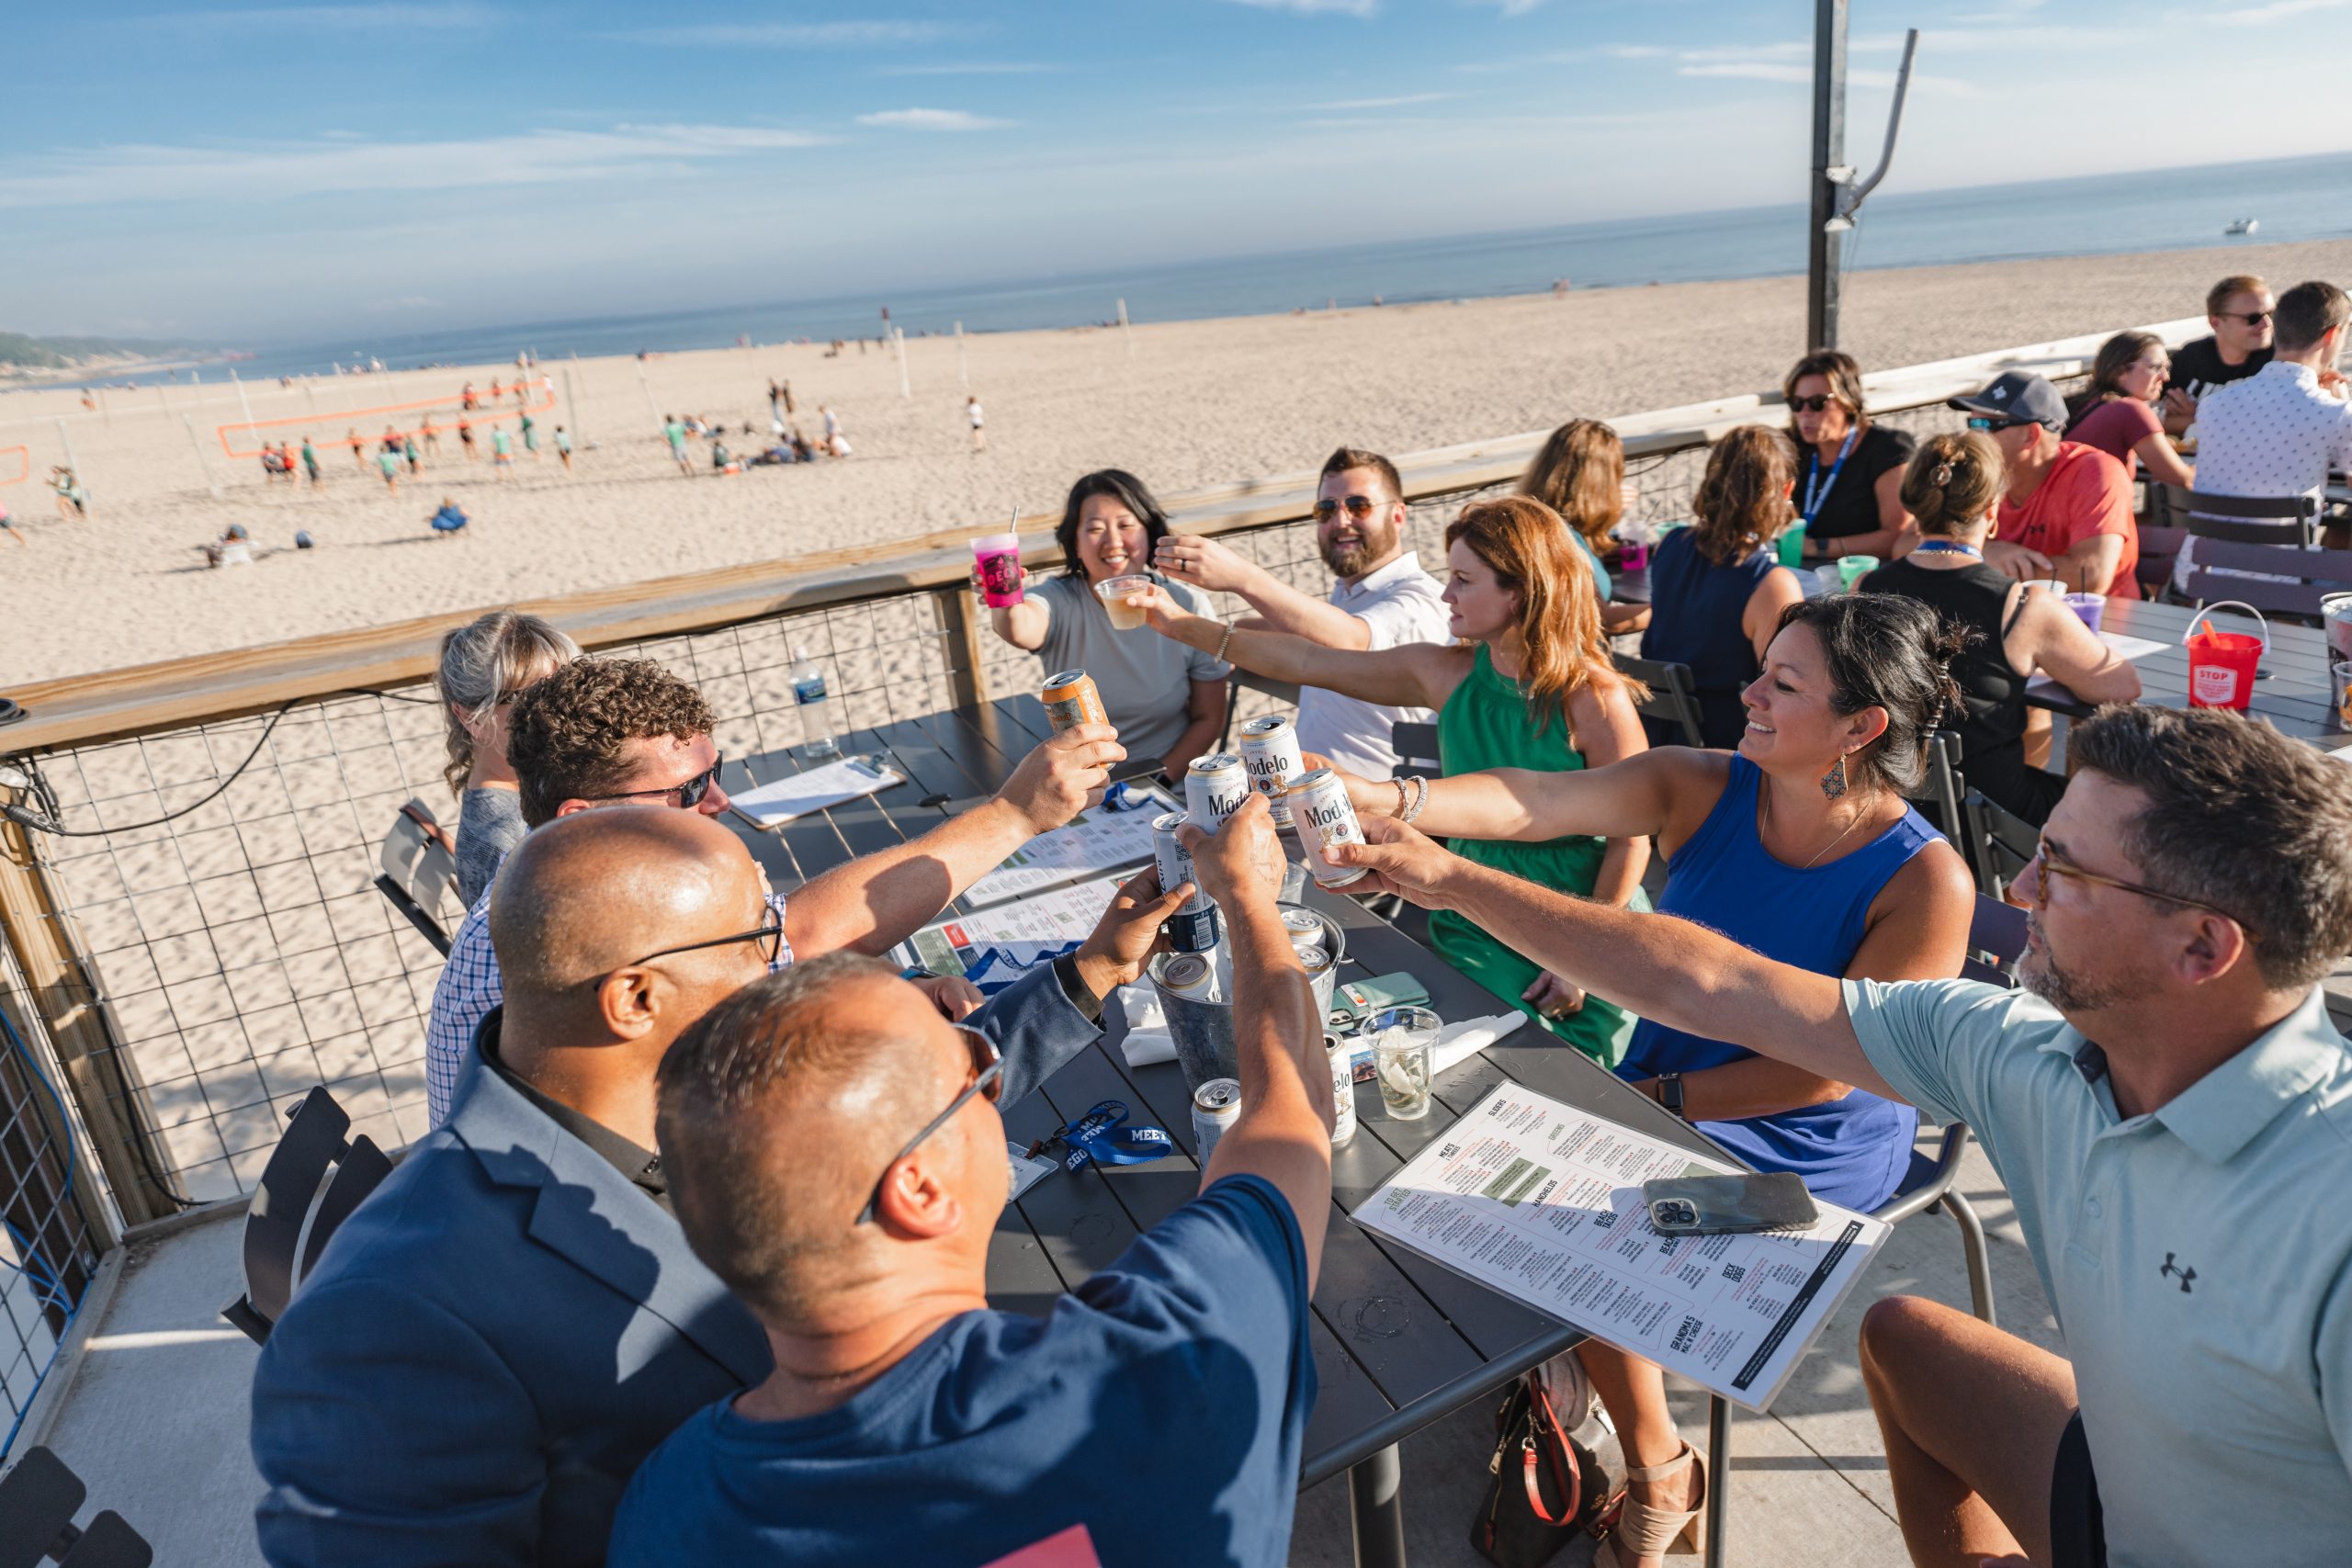 Group of people toasting at beach restaurant.